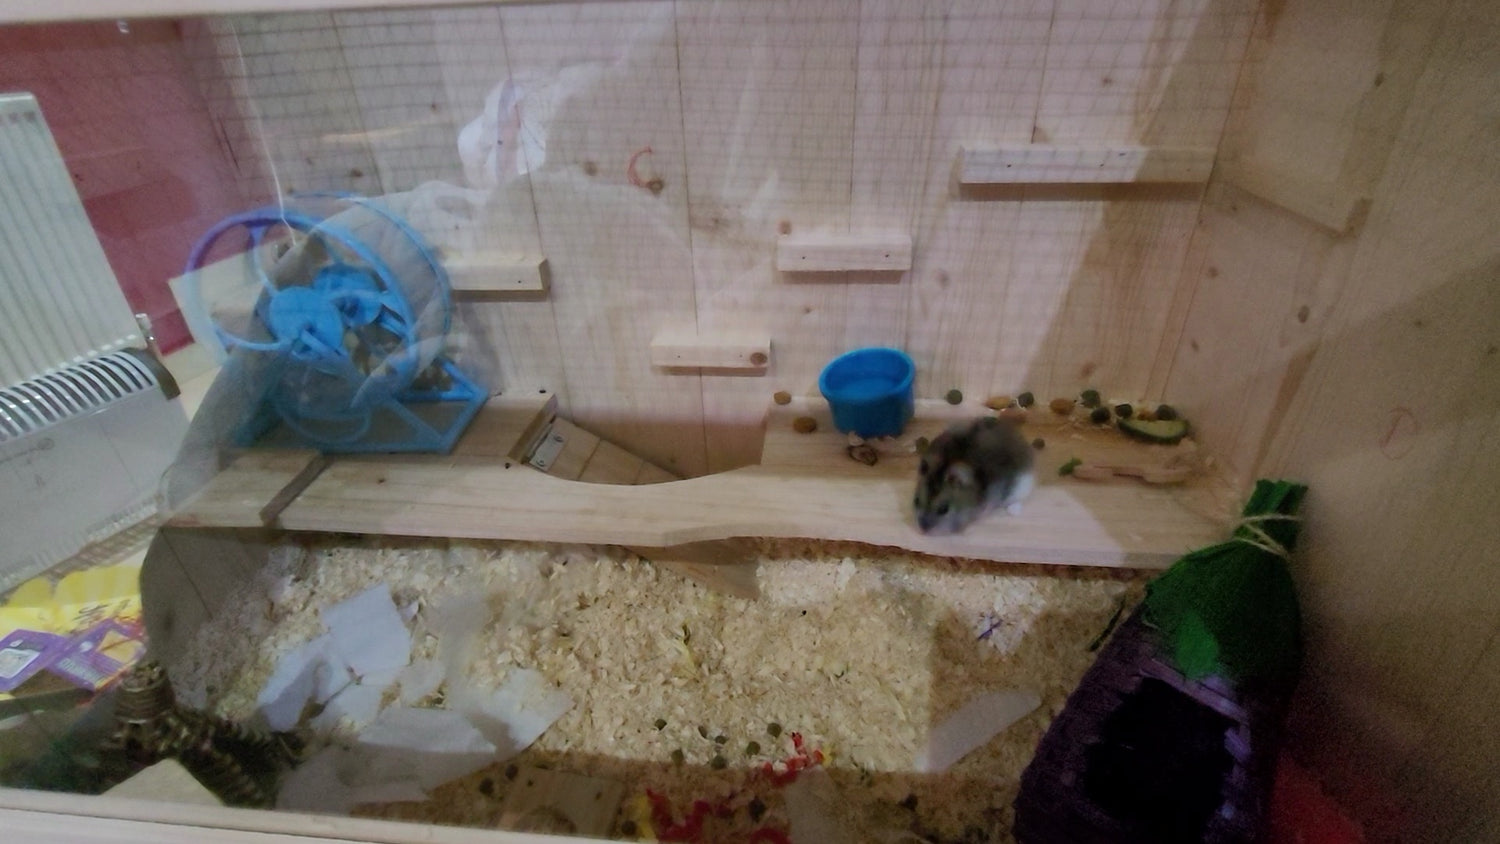 A hamster cage containing a baby dwarf hamster, a tiny wheel and some small hamster toys and wood shaving bedding in half the cage